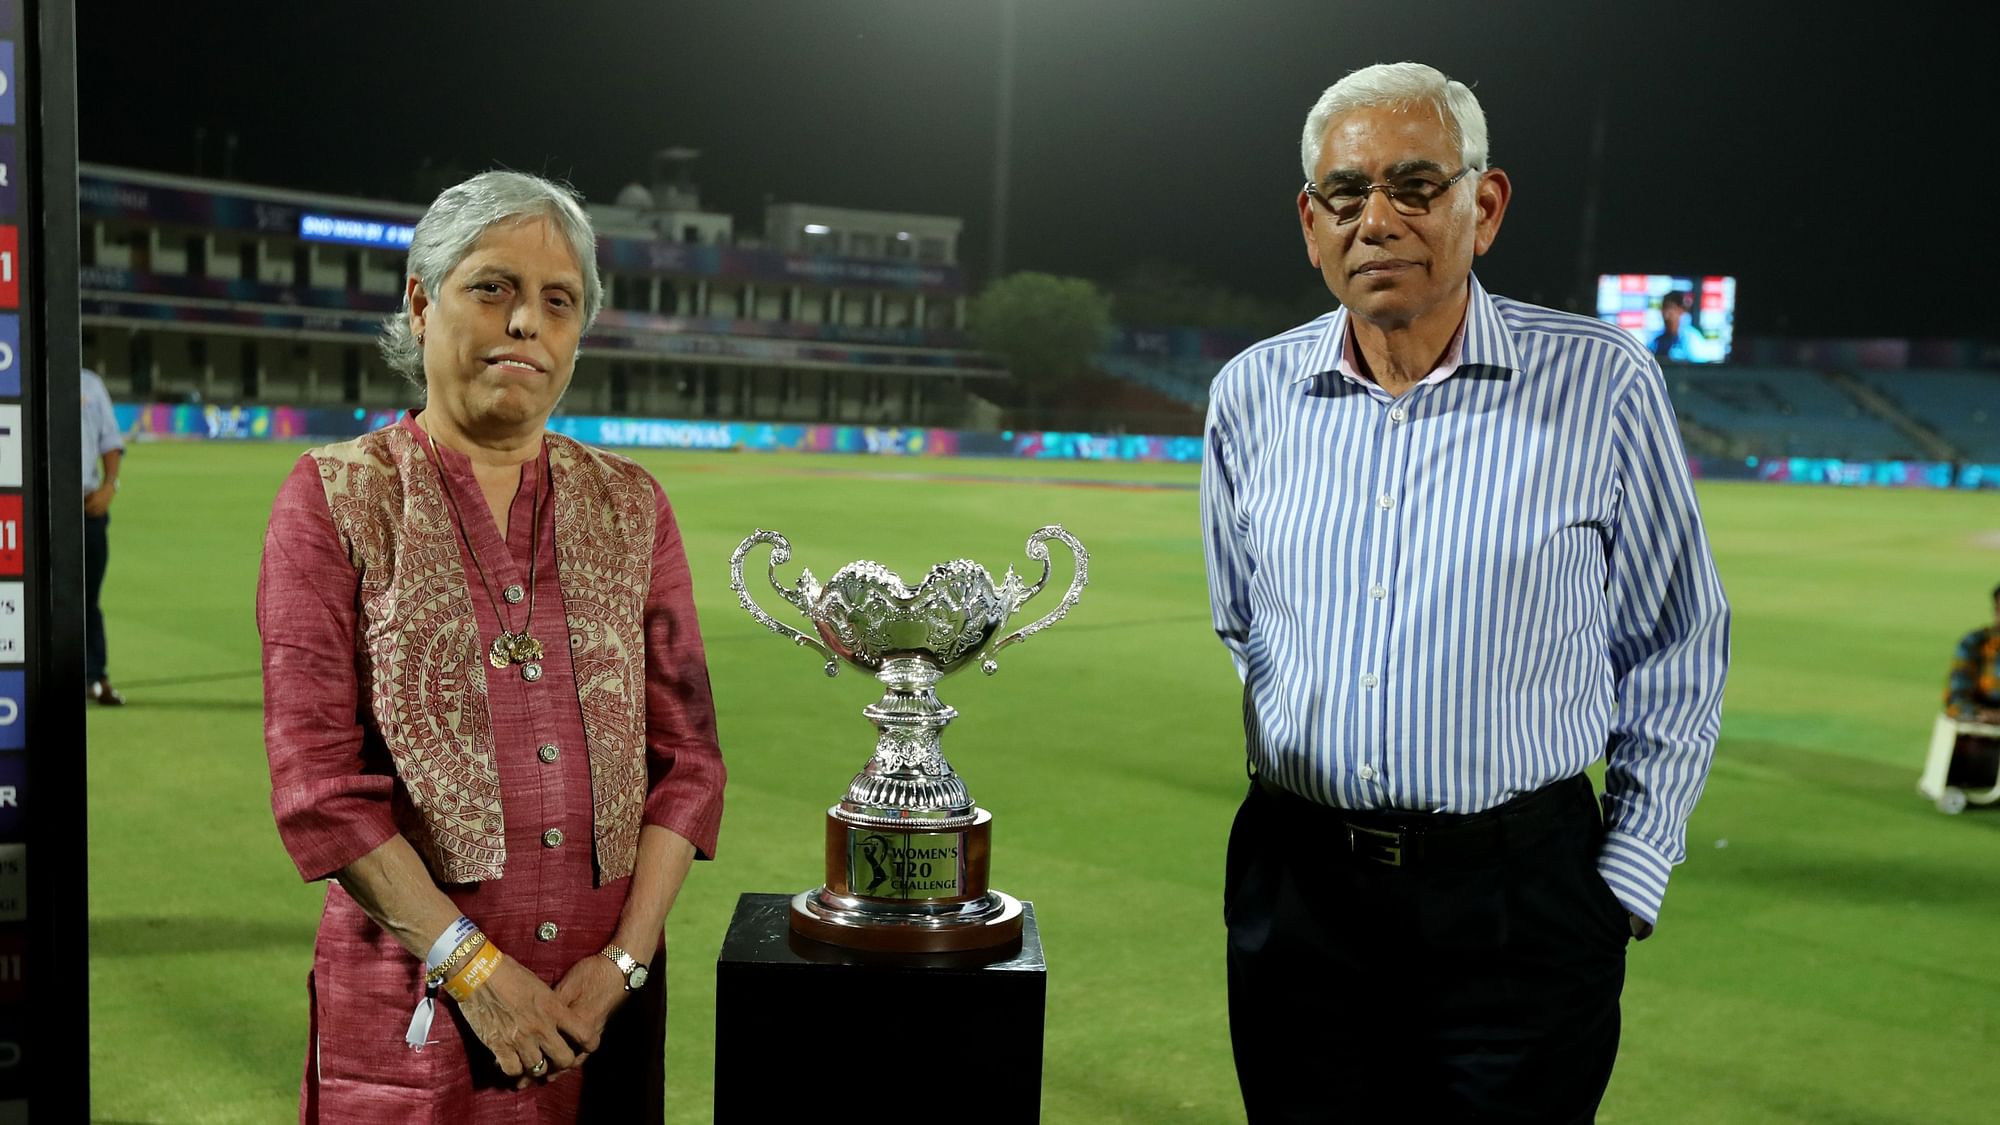 Another stand-off in the CoA, Chief Vinod Rai wants the BCCI elections postponed while Diana Edulji wants the board to stick to the earlier timelines.